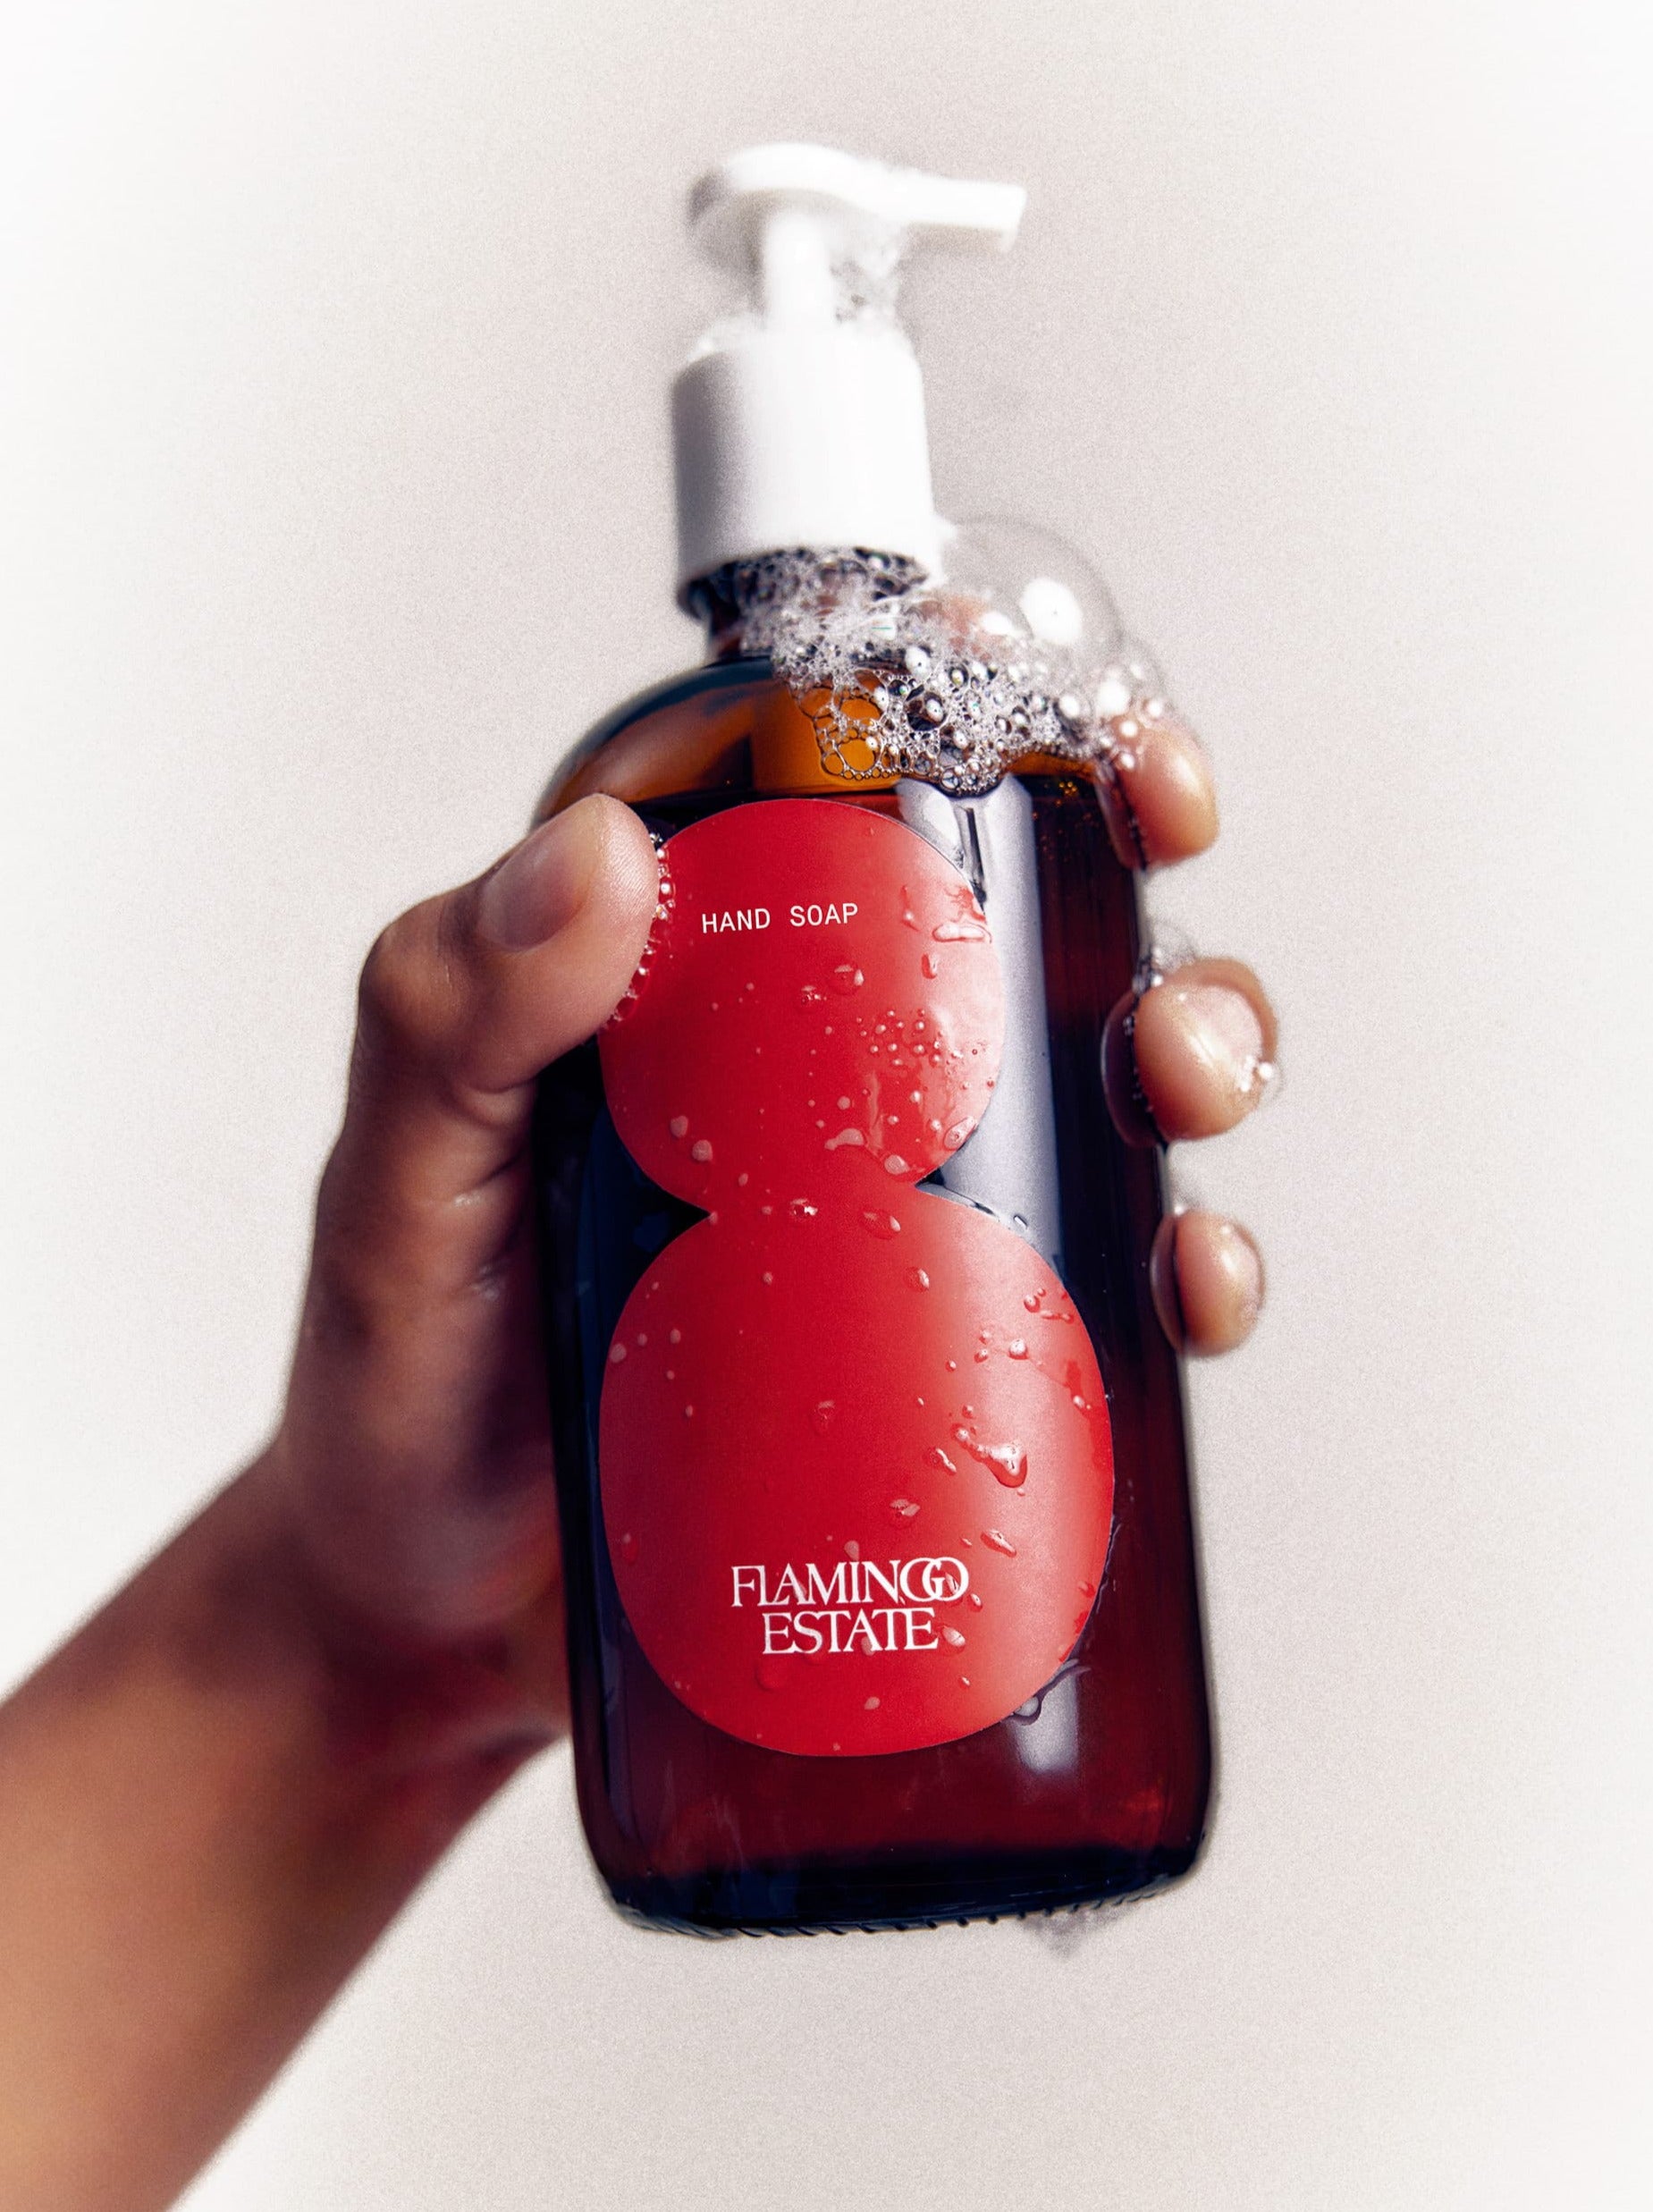 Hand Holding A Foaming Roma Heirloom Tomato Hand Soap Bottle